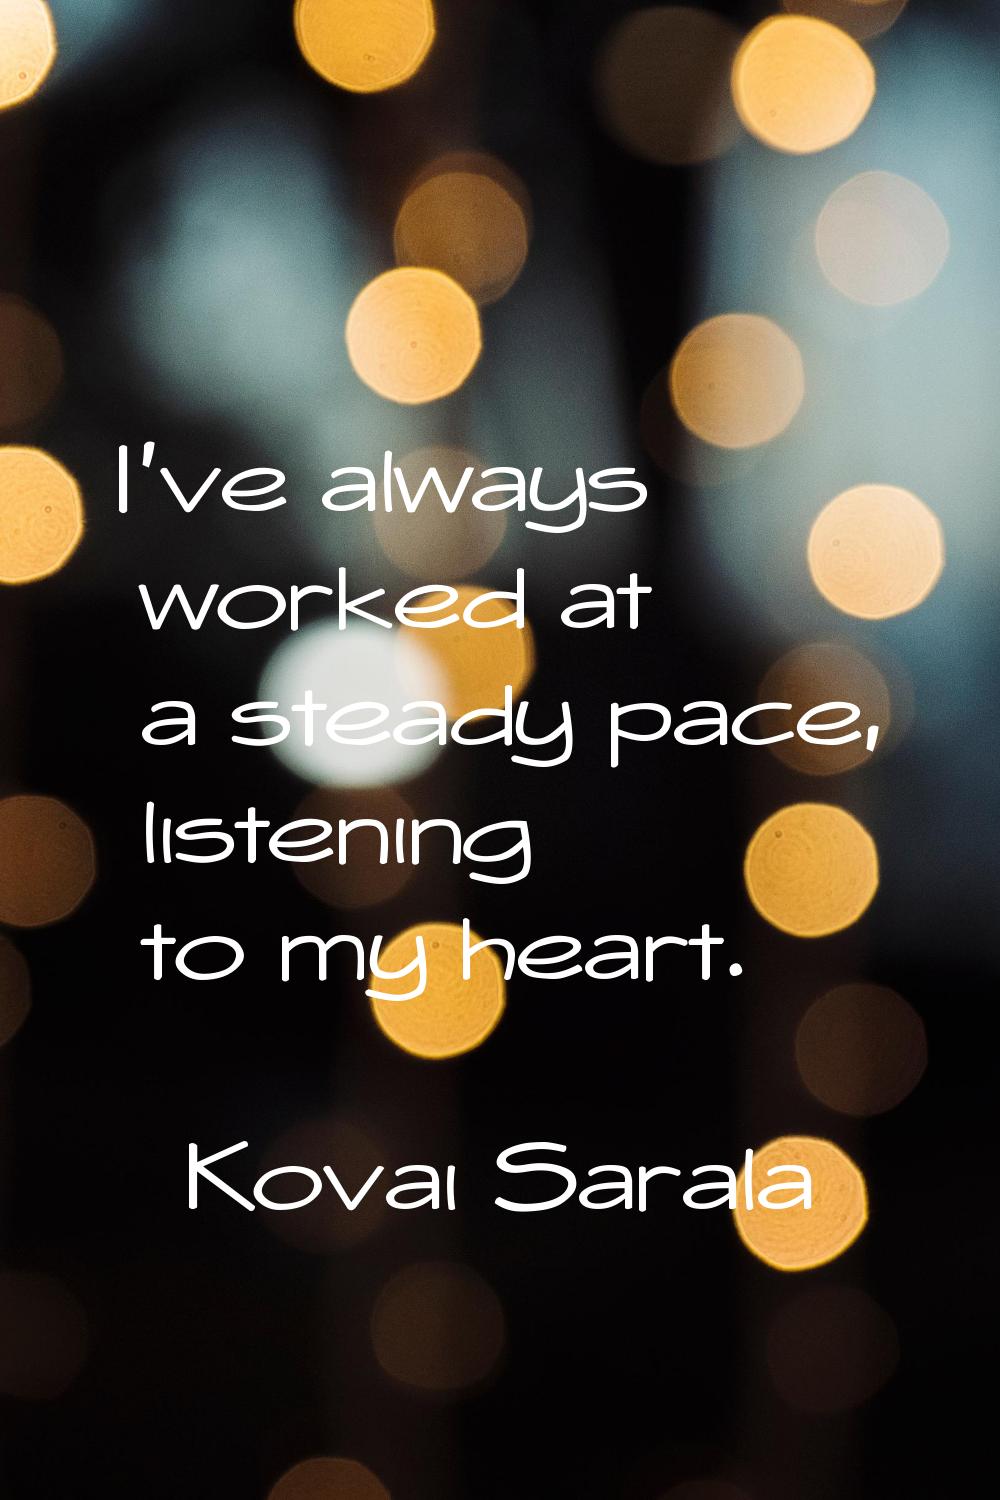 I've always worked at a steady pace, listening to my heart.